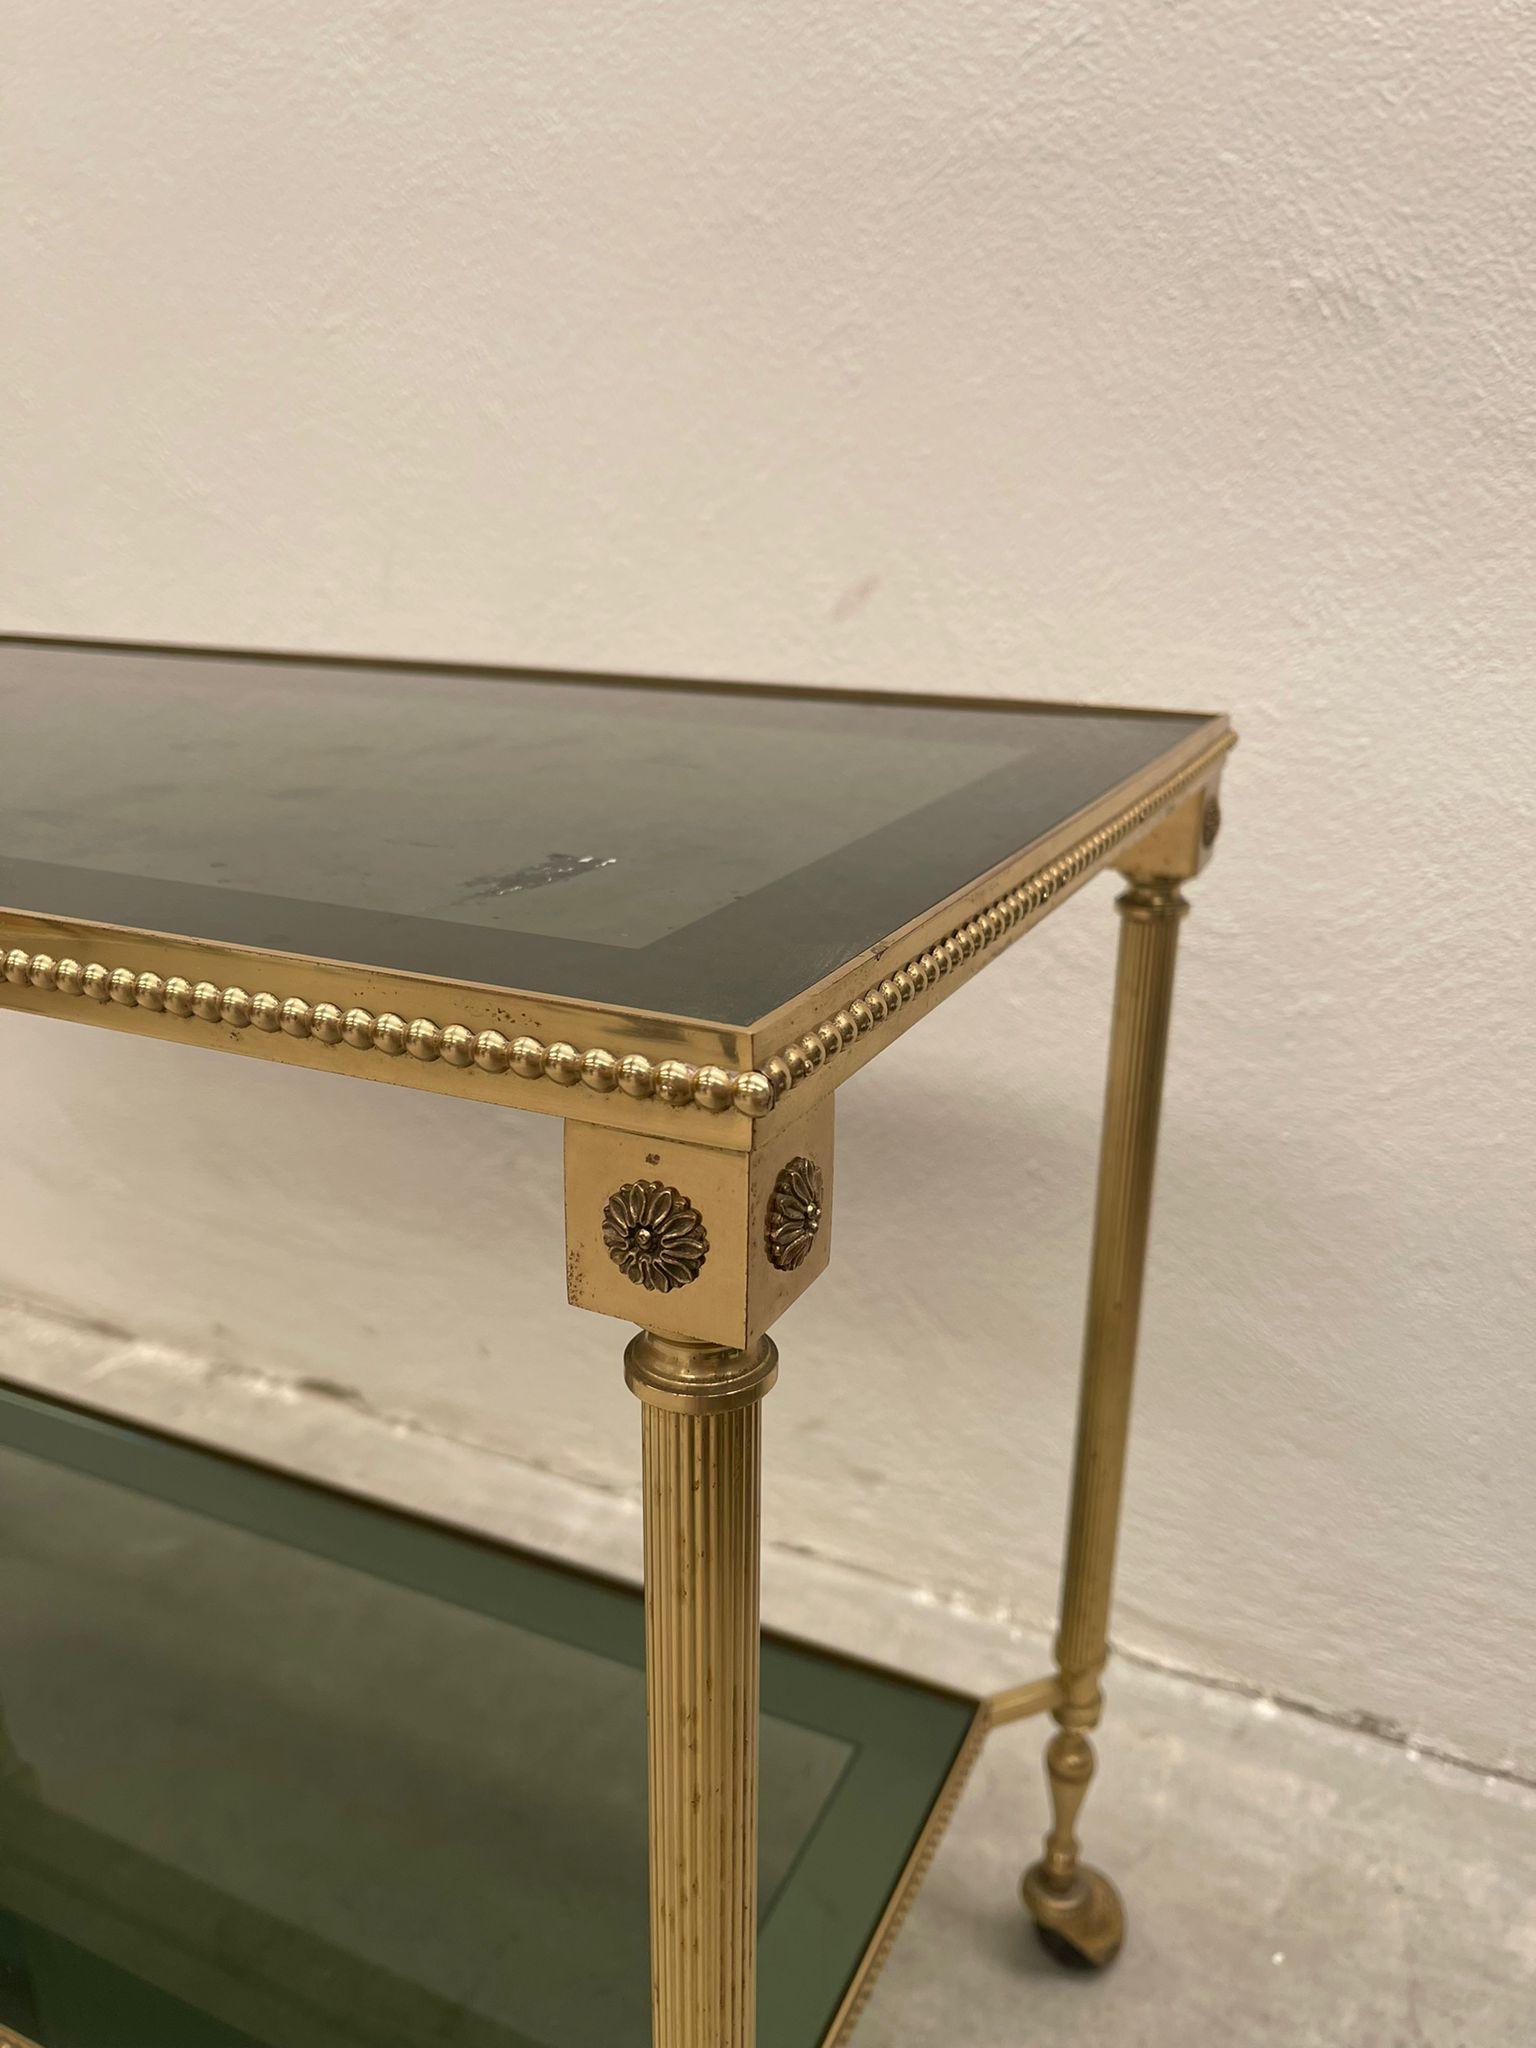 Multipurpose trolley made in Italy around 1960. Very delicate and fine decorations with a touch of uniqueness thanks to the silvered brass glasses. 
Perfect for any type of decor where you want to give it a greater touch of class and elegance.